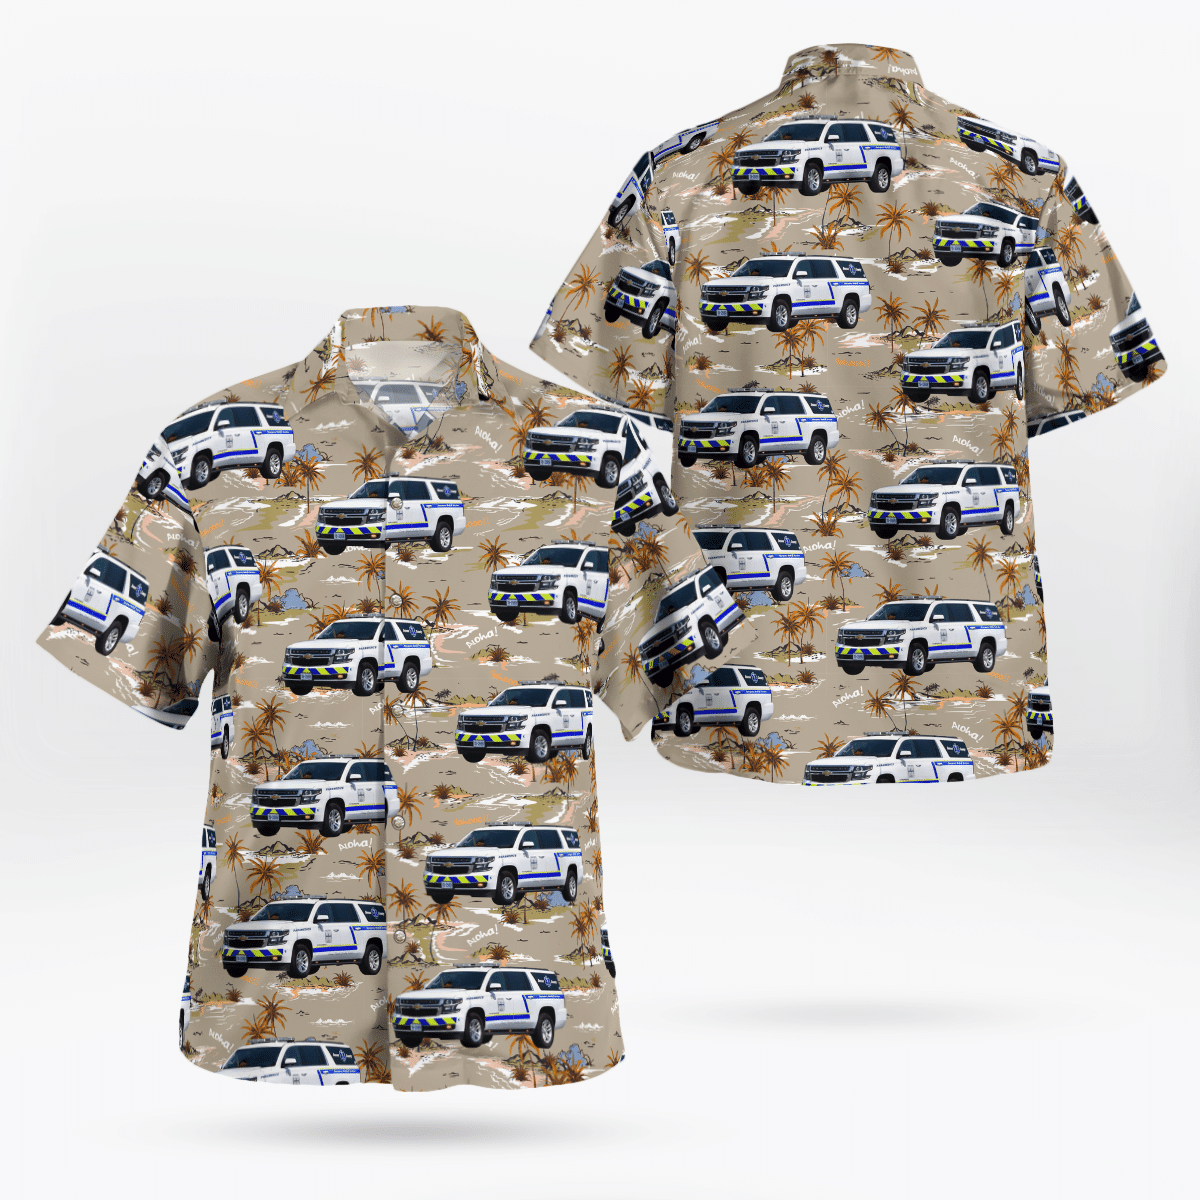 If you are in need of a new summertime look, pick up this Hawaiian shirt 43